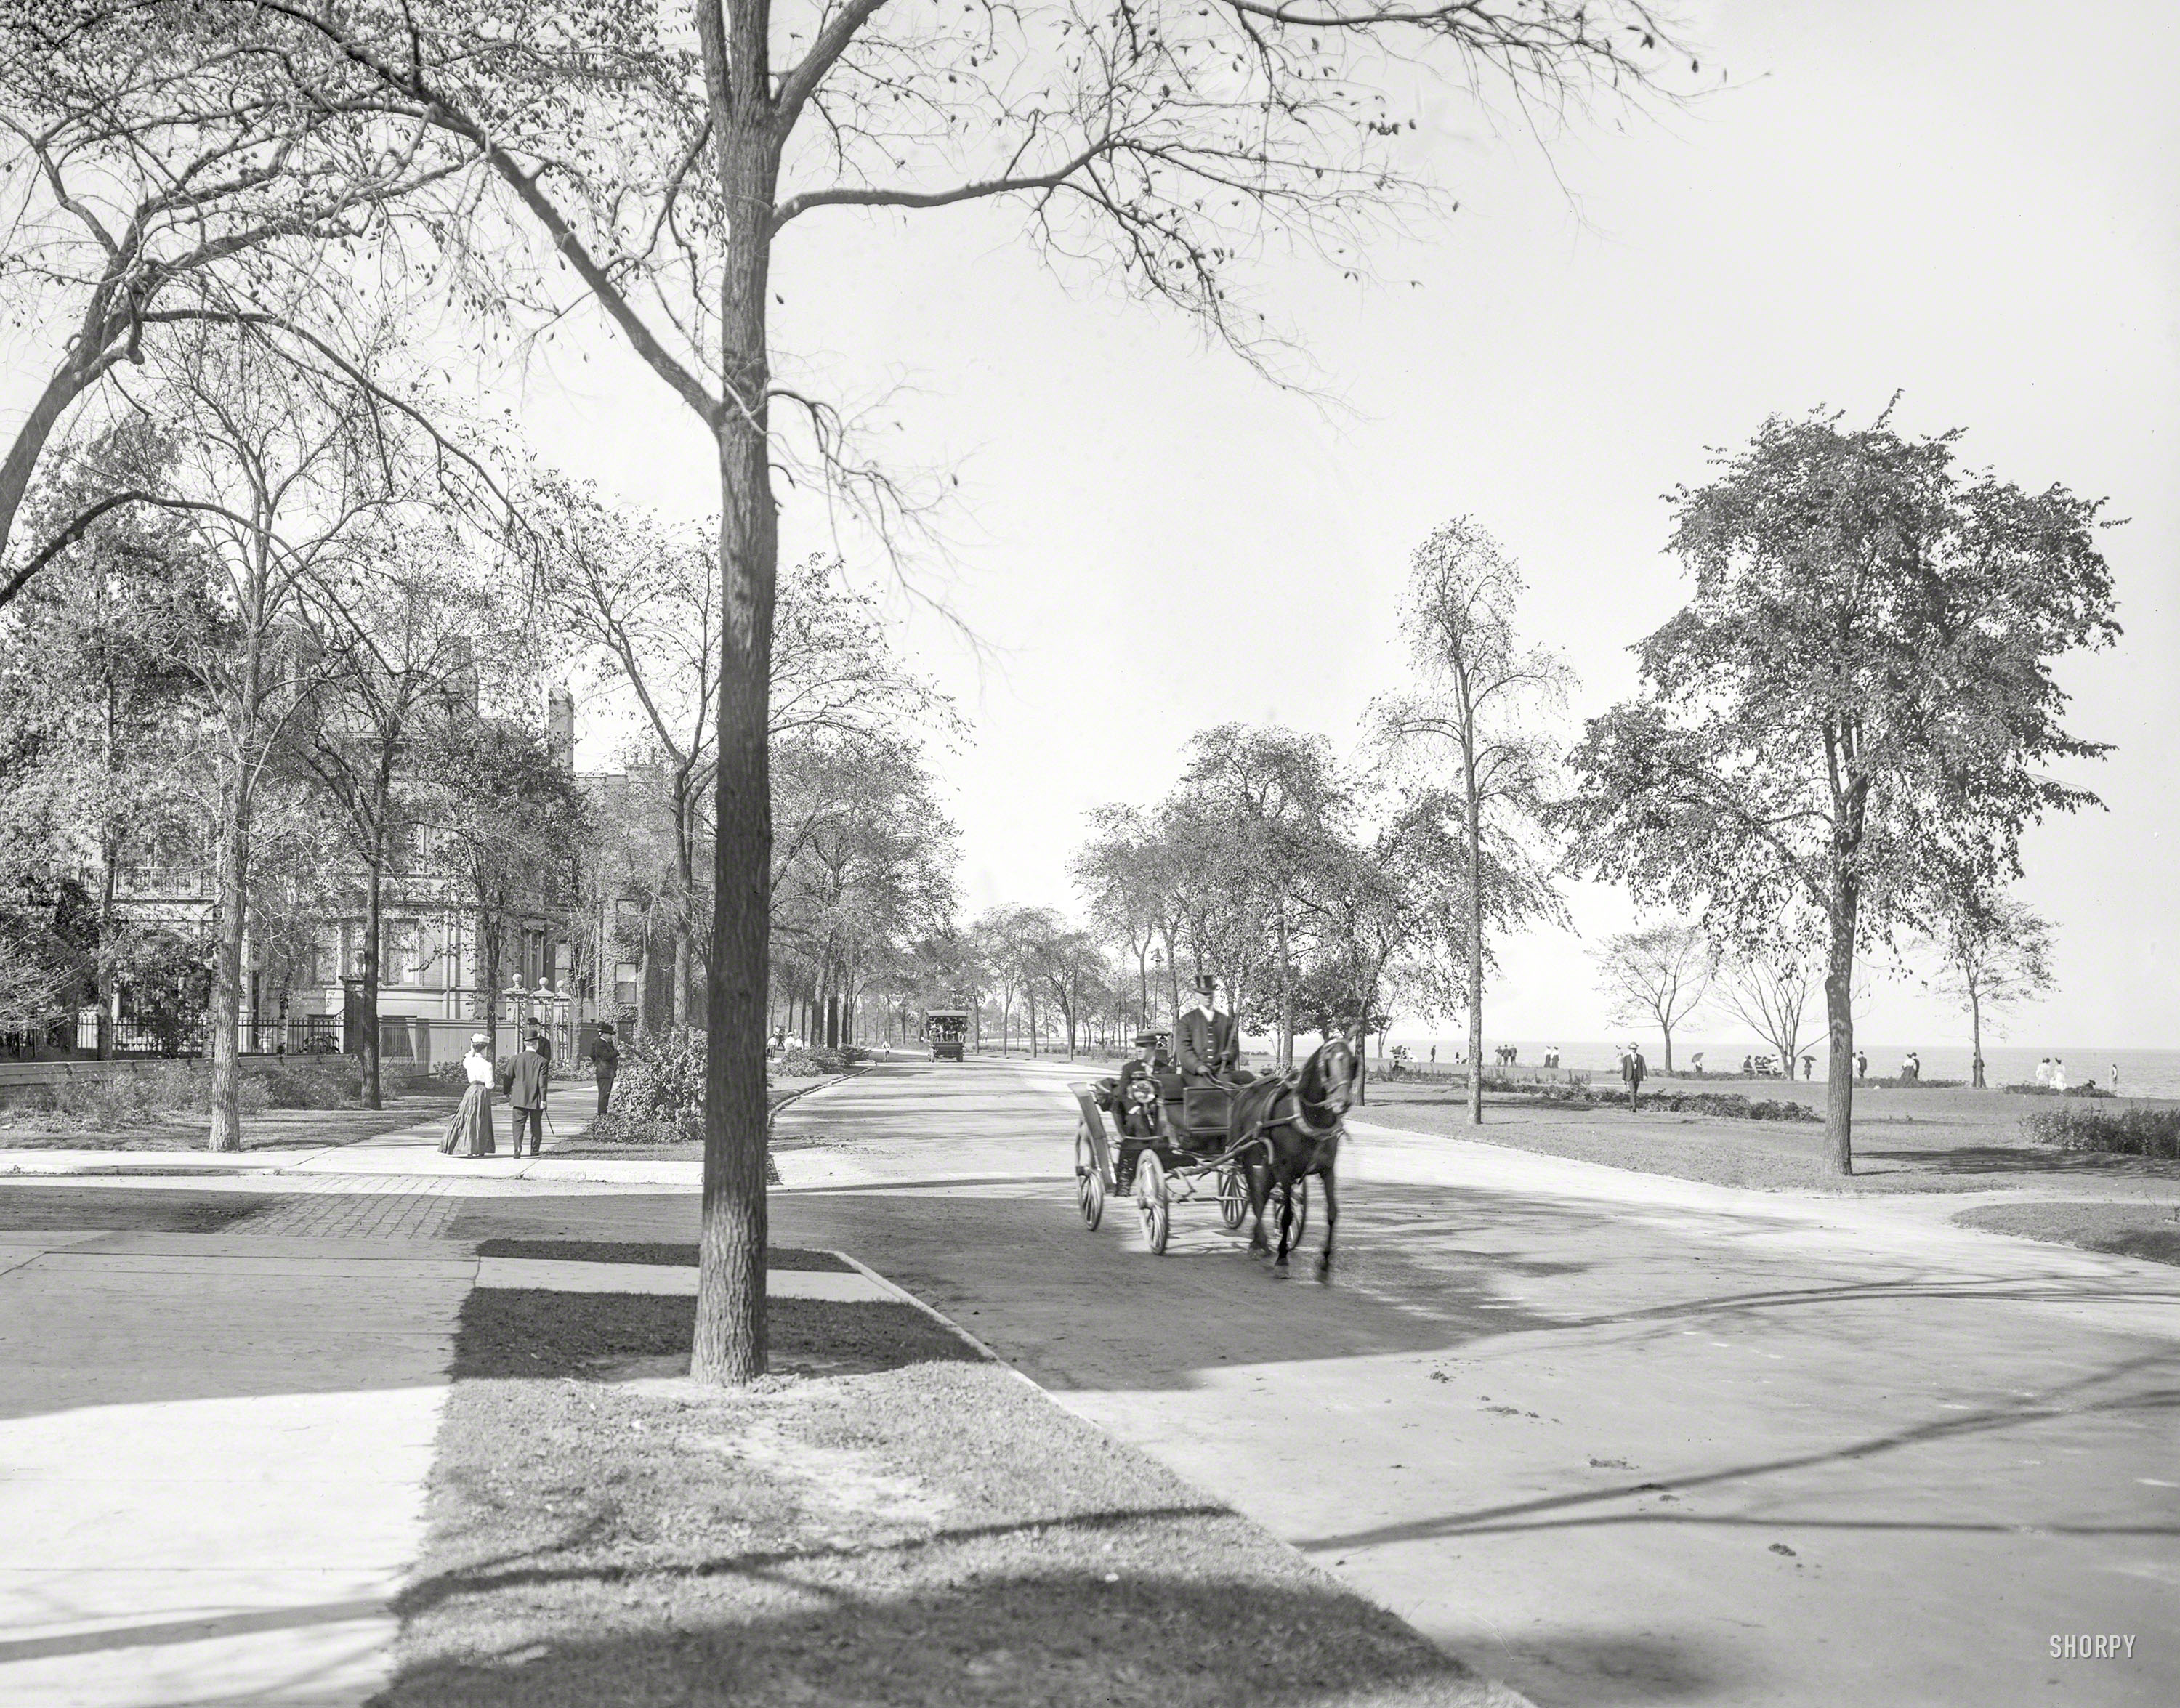 Nov. 22, 1905. "Lake Shore Drive, Chicago." A nice day for a carriage ride, and look out for that omnibus. 8x10 inch dry plate glass negative. View full size.